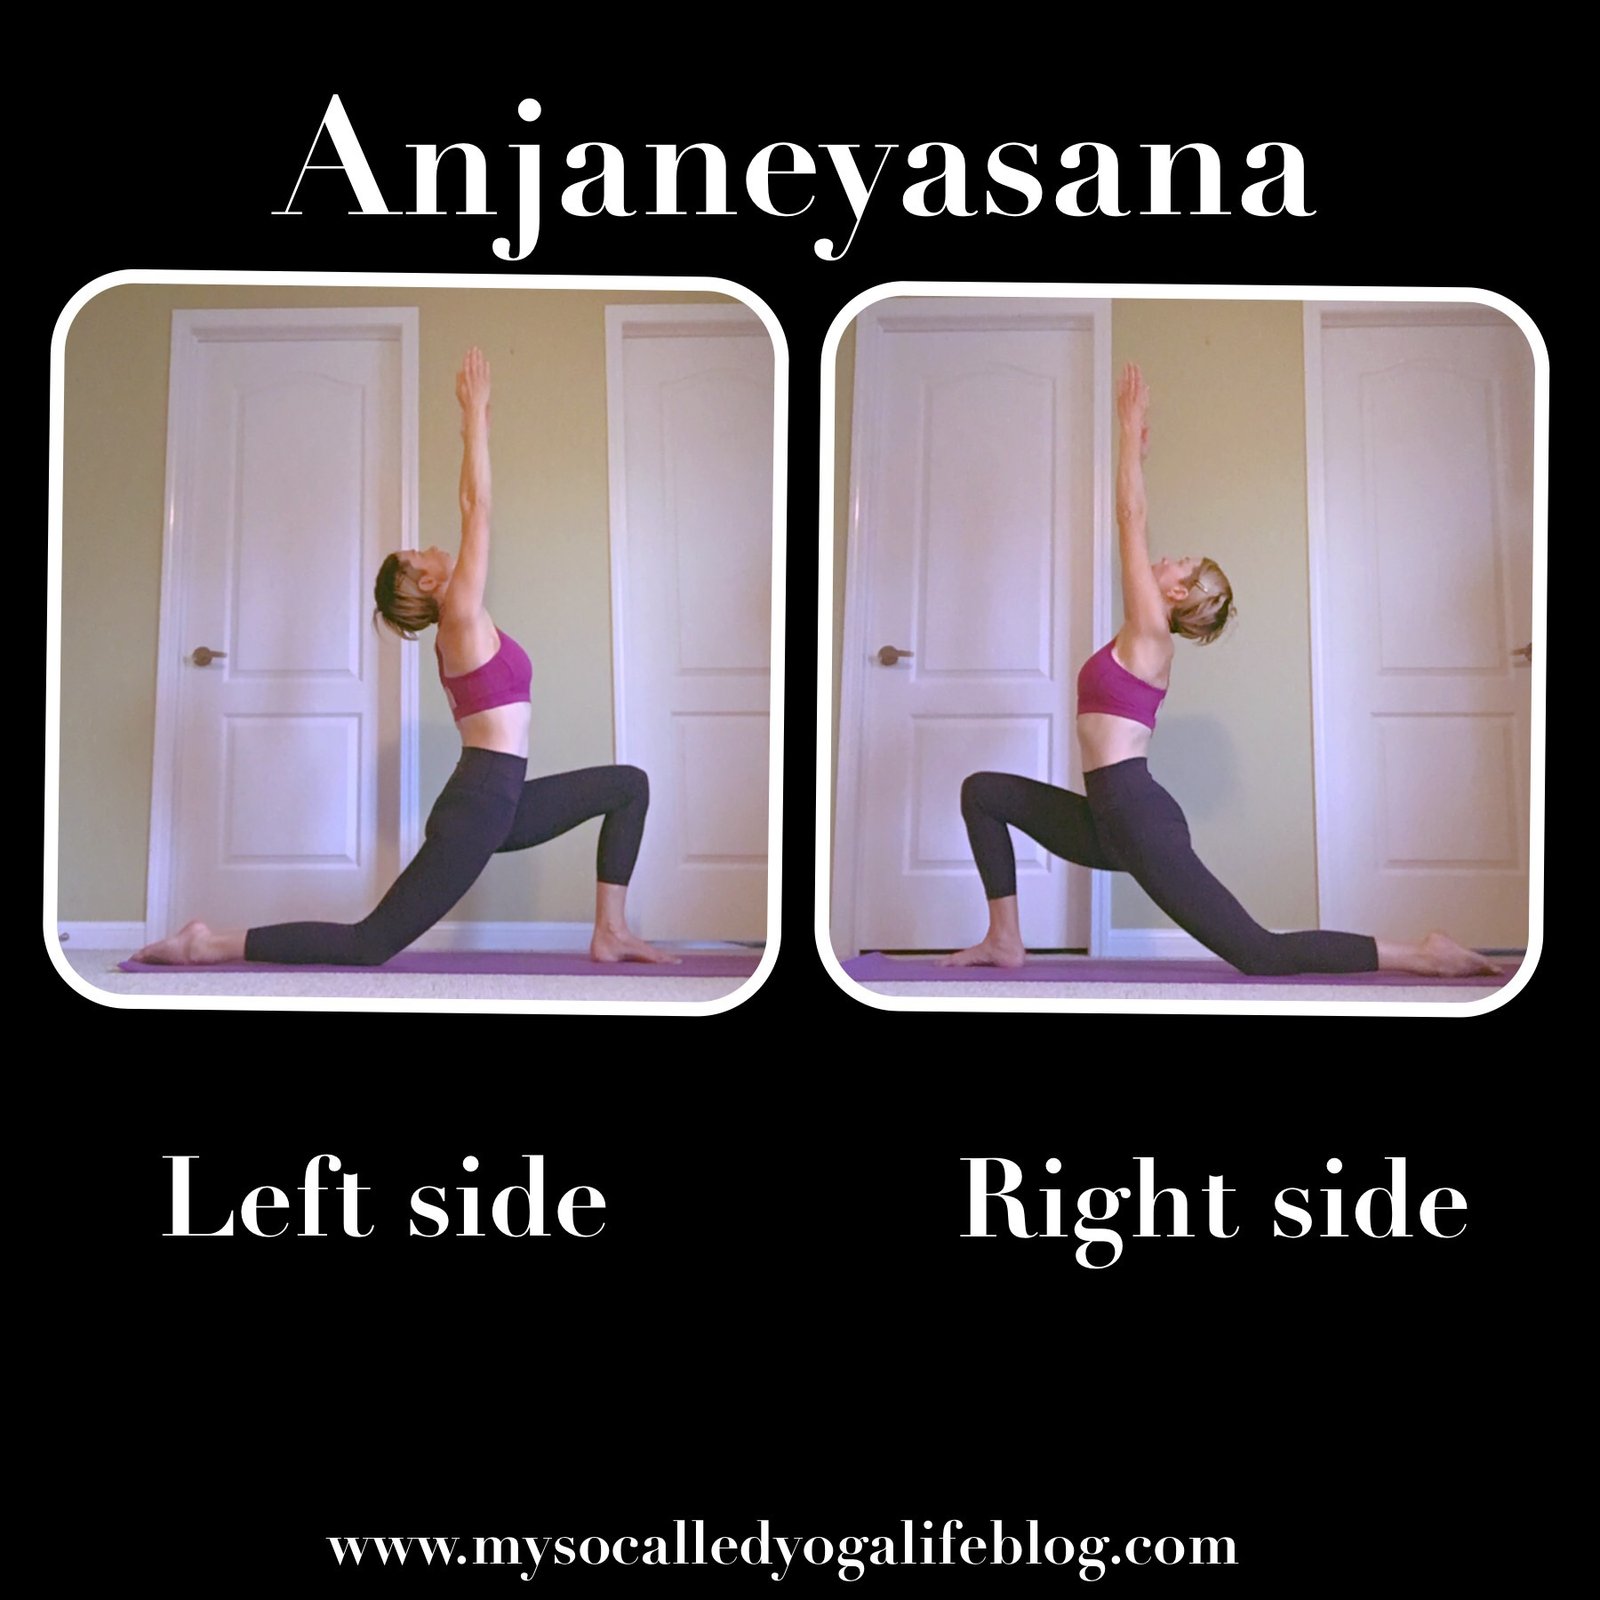 Check out this easy beginners yoga practice